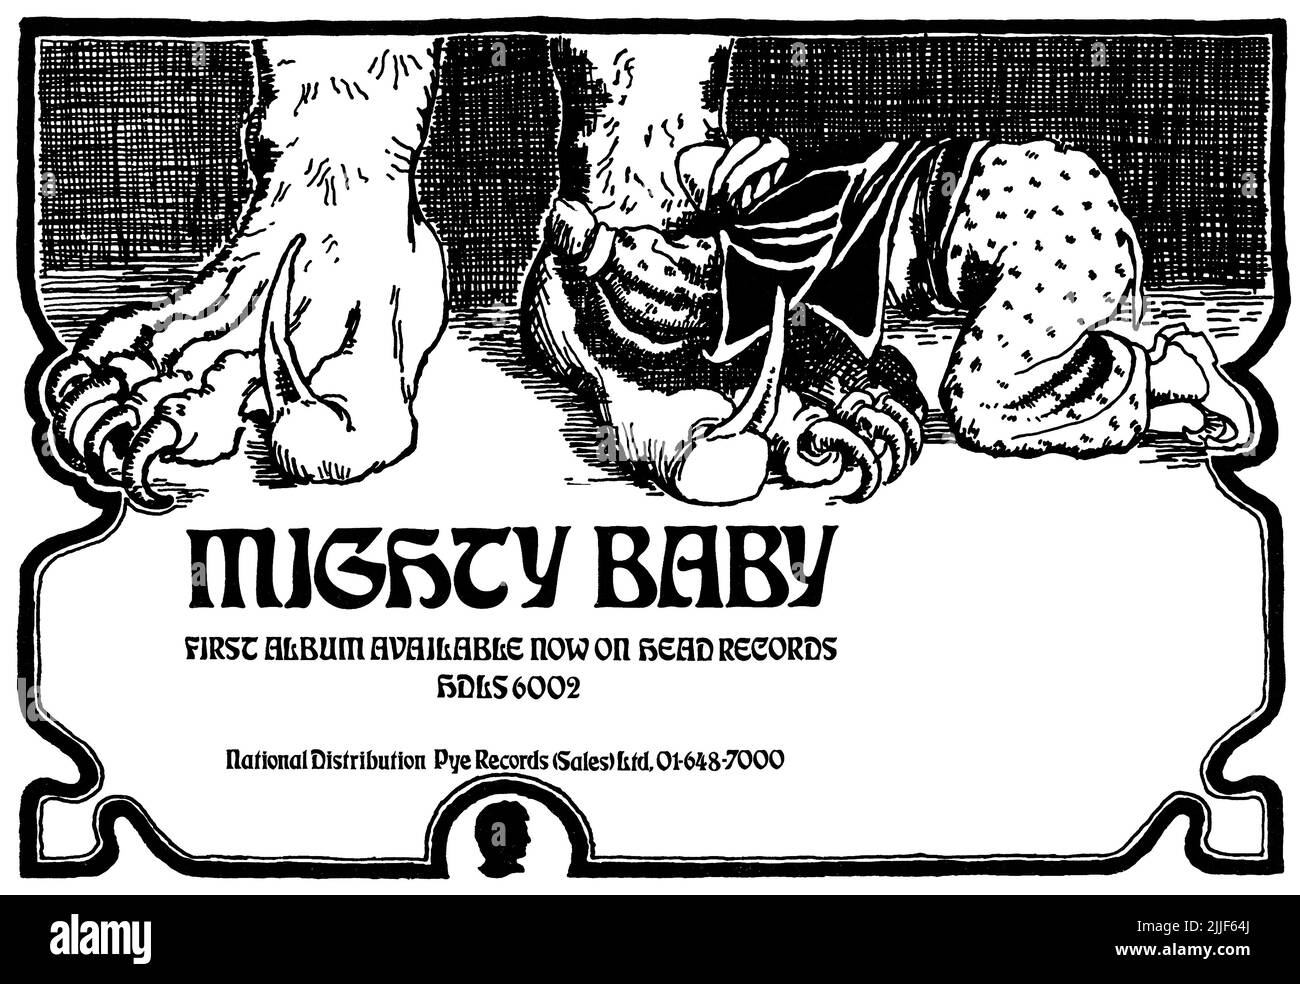 1969 British advertisement for the debut album by Mighty Baby on Head Records. Stock Photo